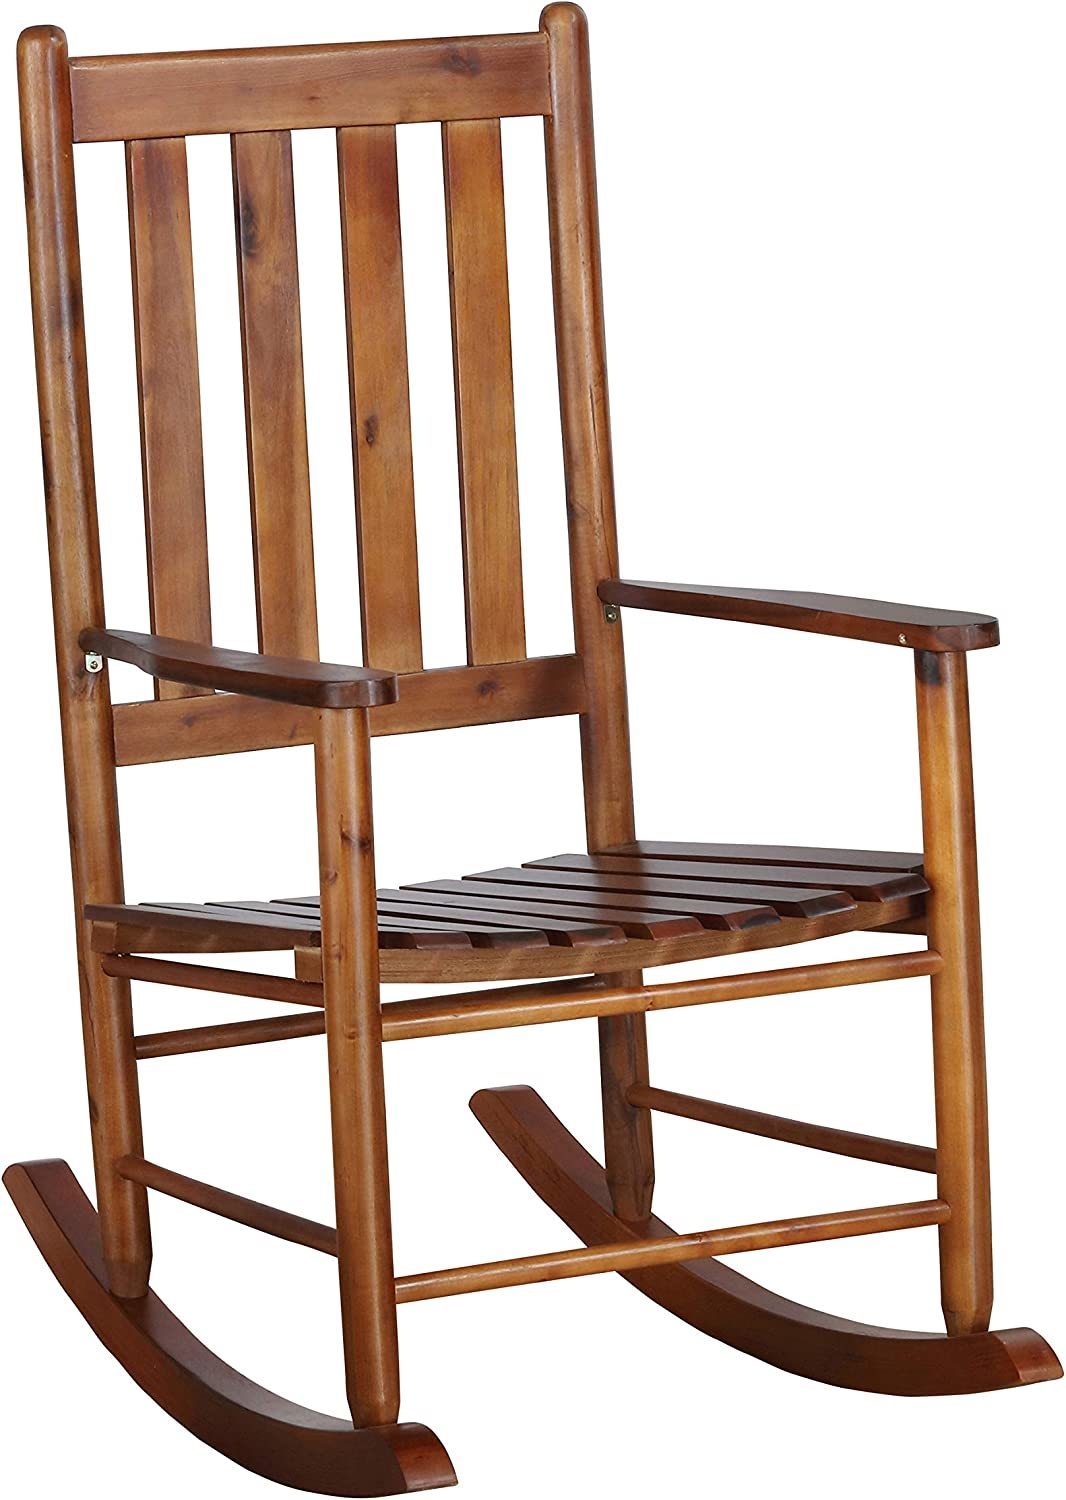 Slat Back Wooden Golden Brown Rocking Chair From Coaster Home Furnishings. - $130.96